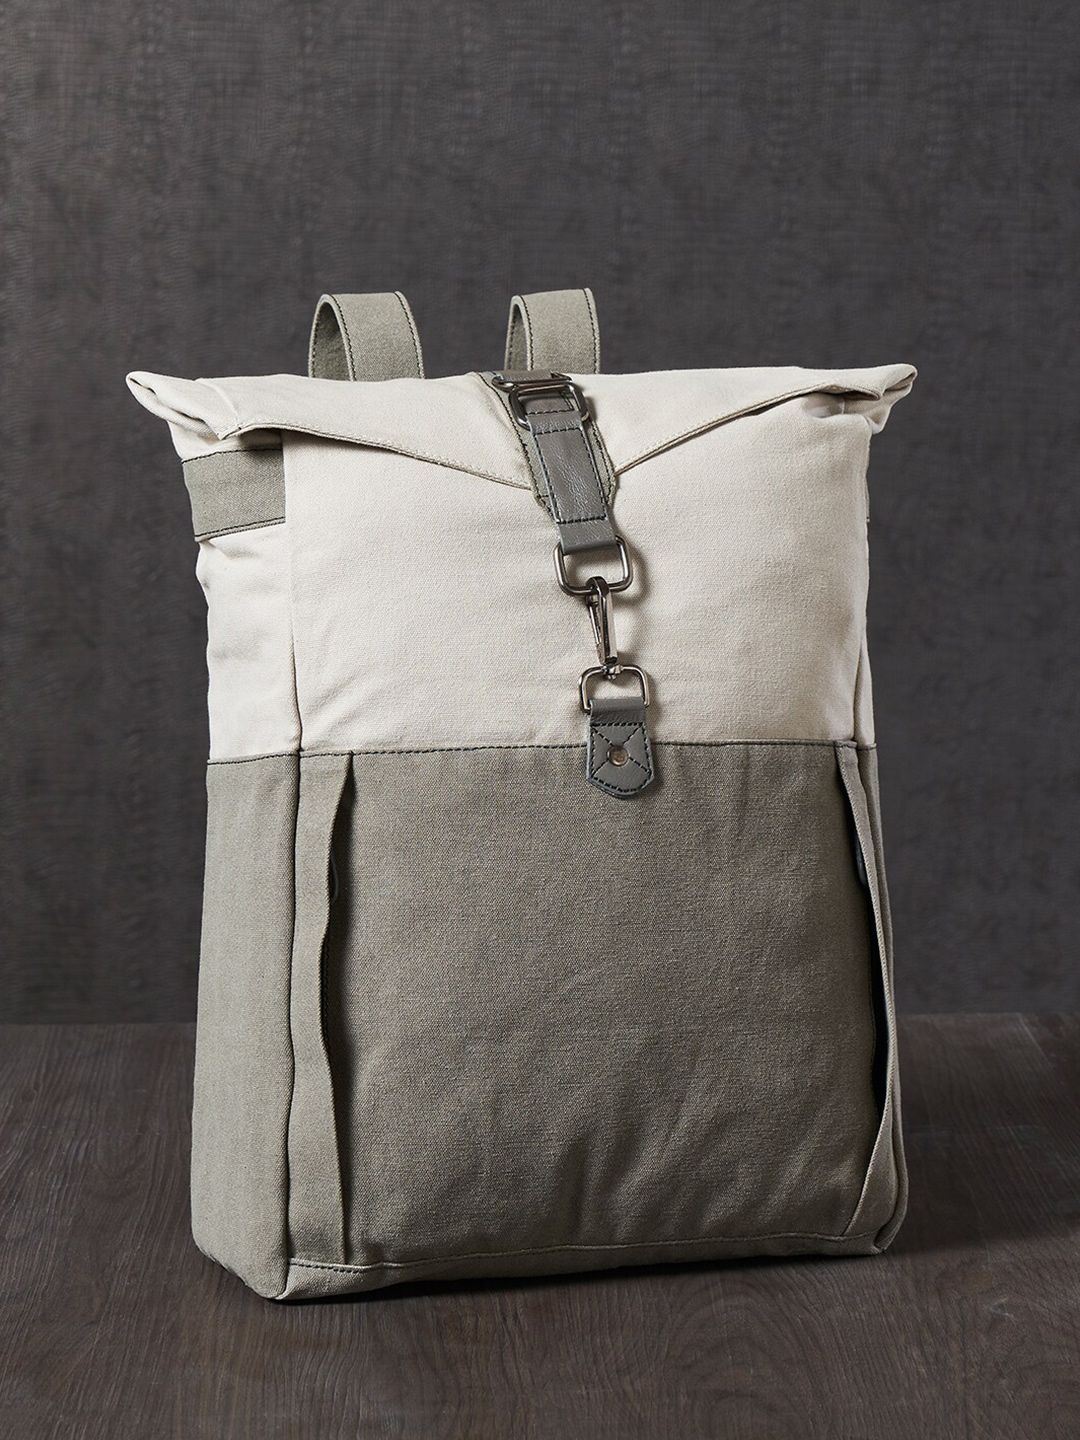 Mona B Unisex Grey & White Solid Canvas Backpack Price in India